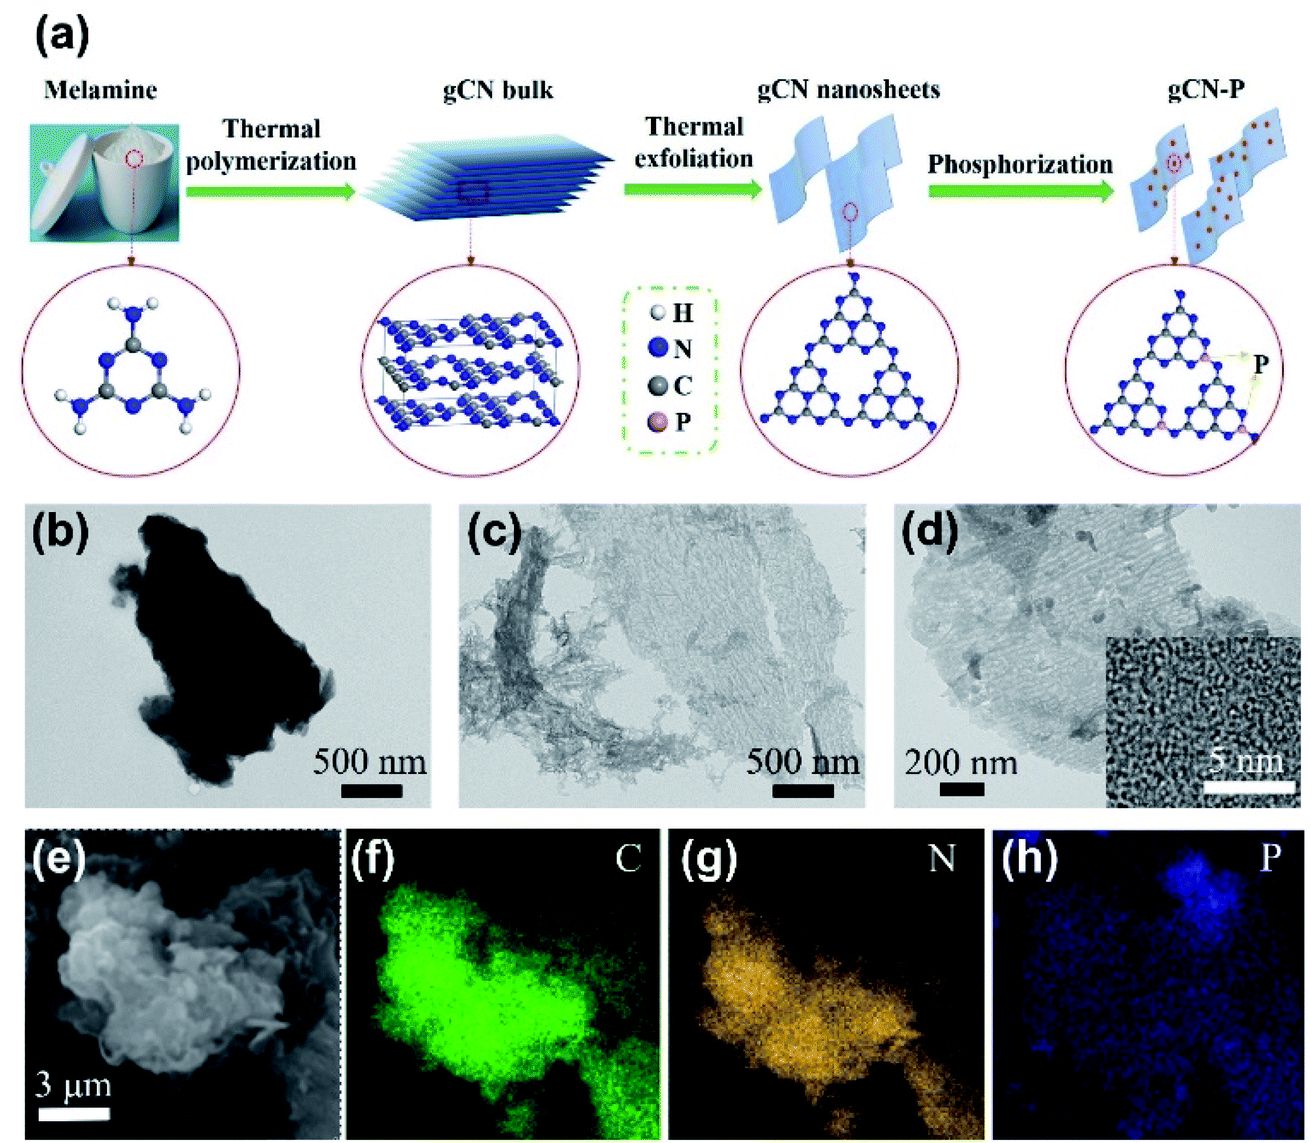 Leong Yip Ong & Co - Functionalizing Dna Nanostructures For Therapeutic